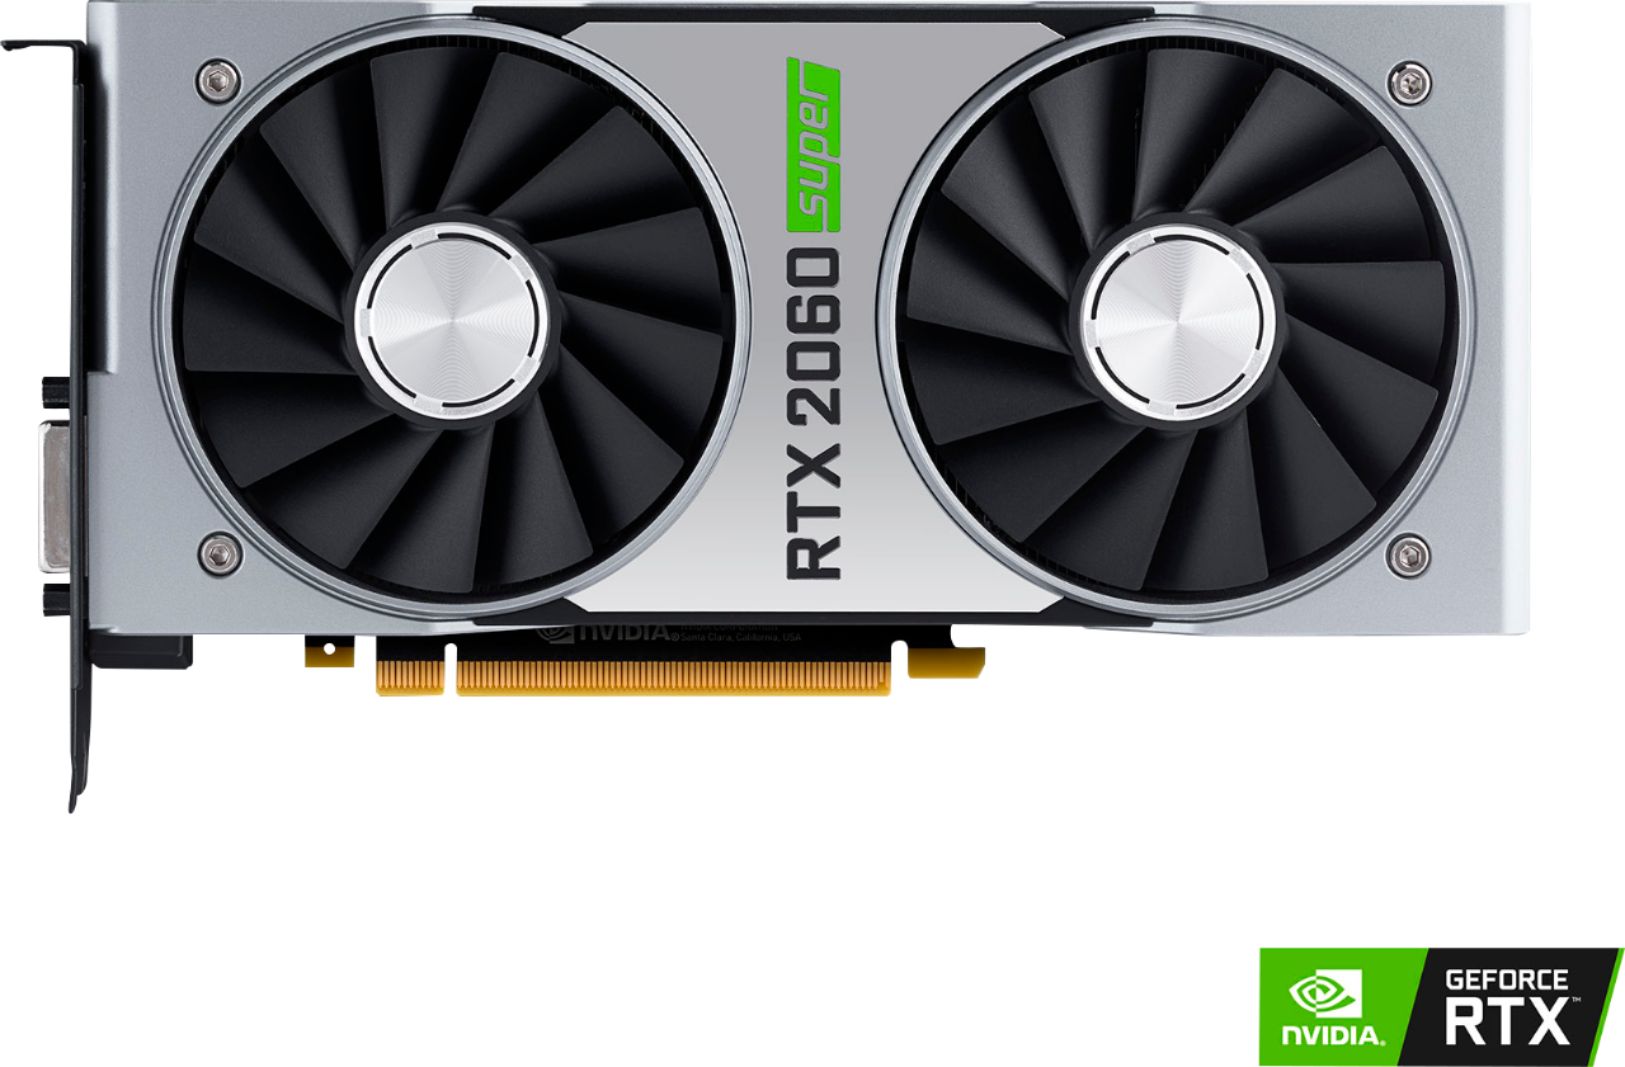 NVIDIA GeForce RTX 2060 SUPER PCI Express Graphics Card Black/Silver 900-1G160-2560-000 - Best Buy